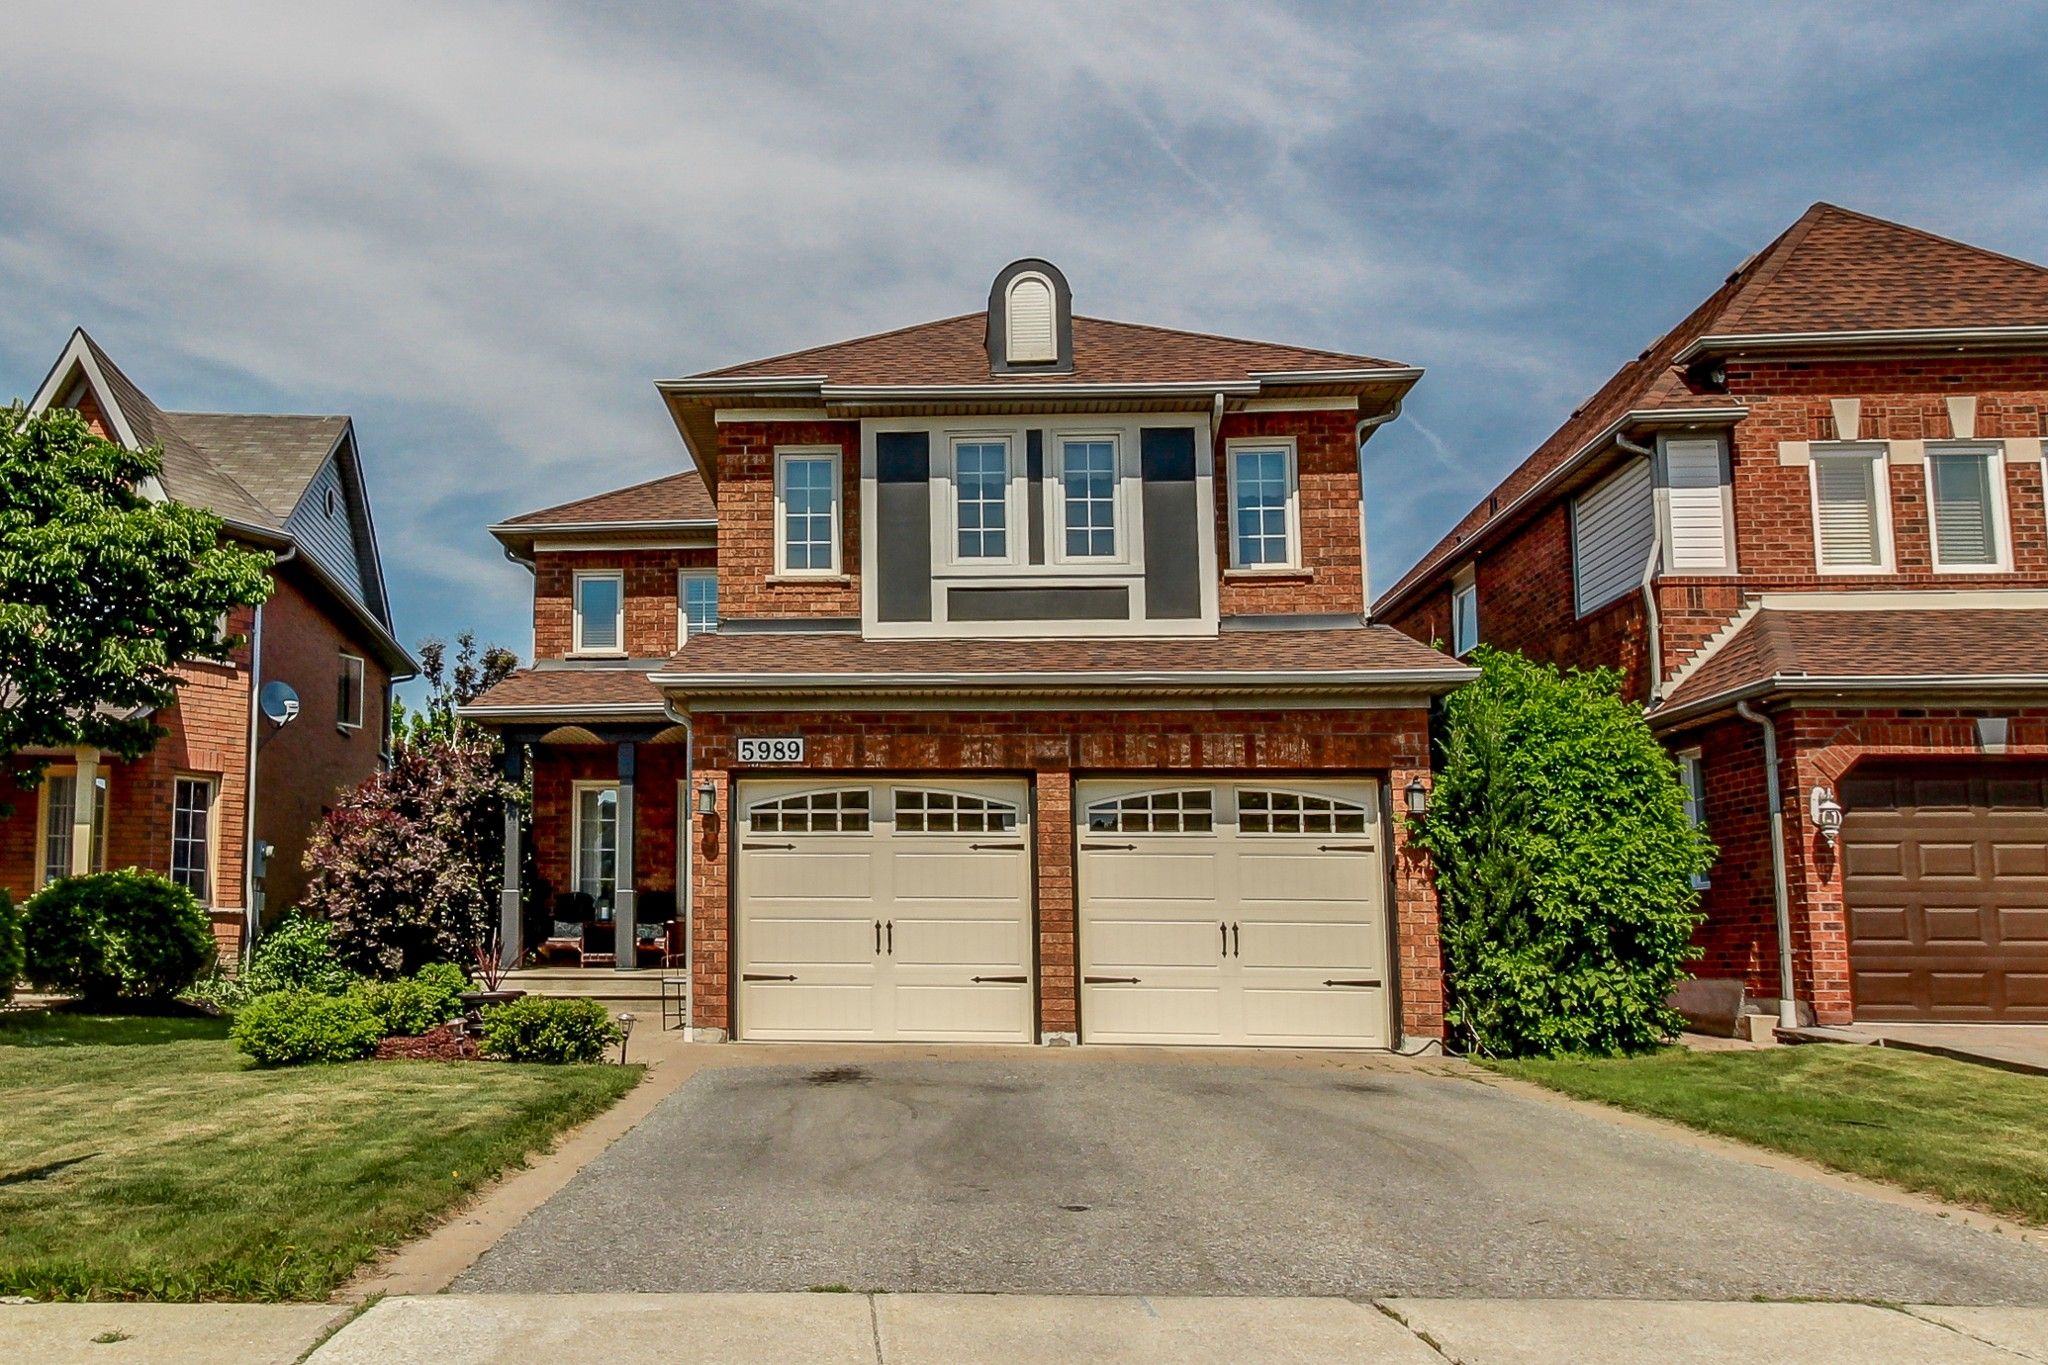 Main Photo: 5989 Greensboro Drive in Mississauga: Central Erin Mills House (2-Storey) for sale : MLS®# W4147283